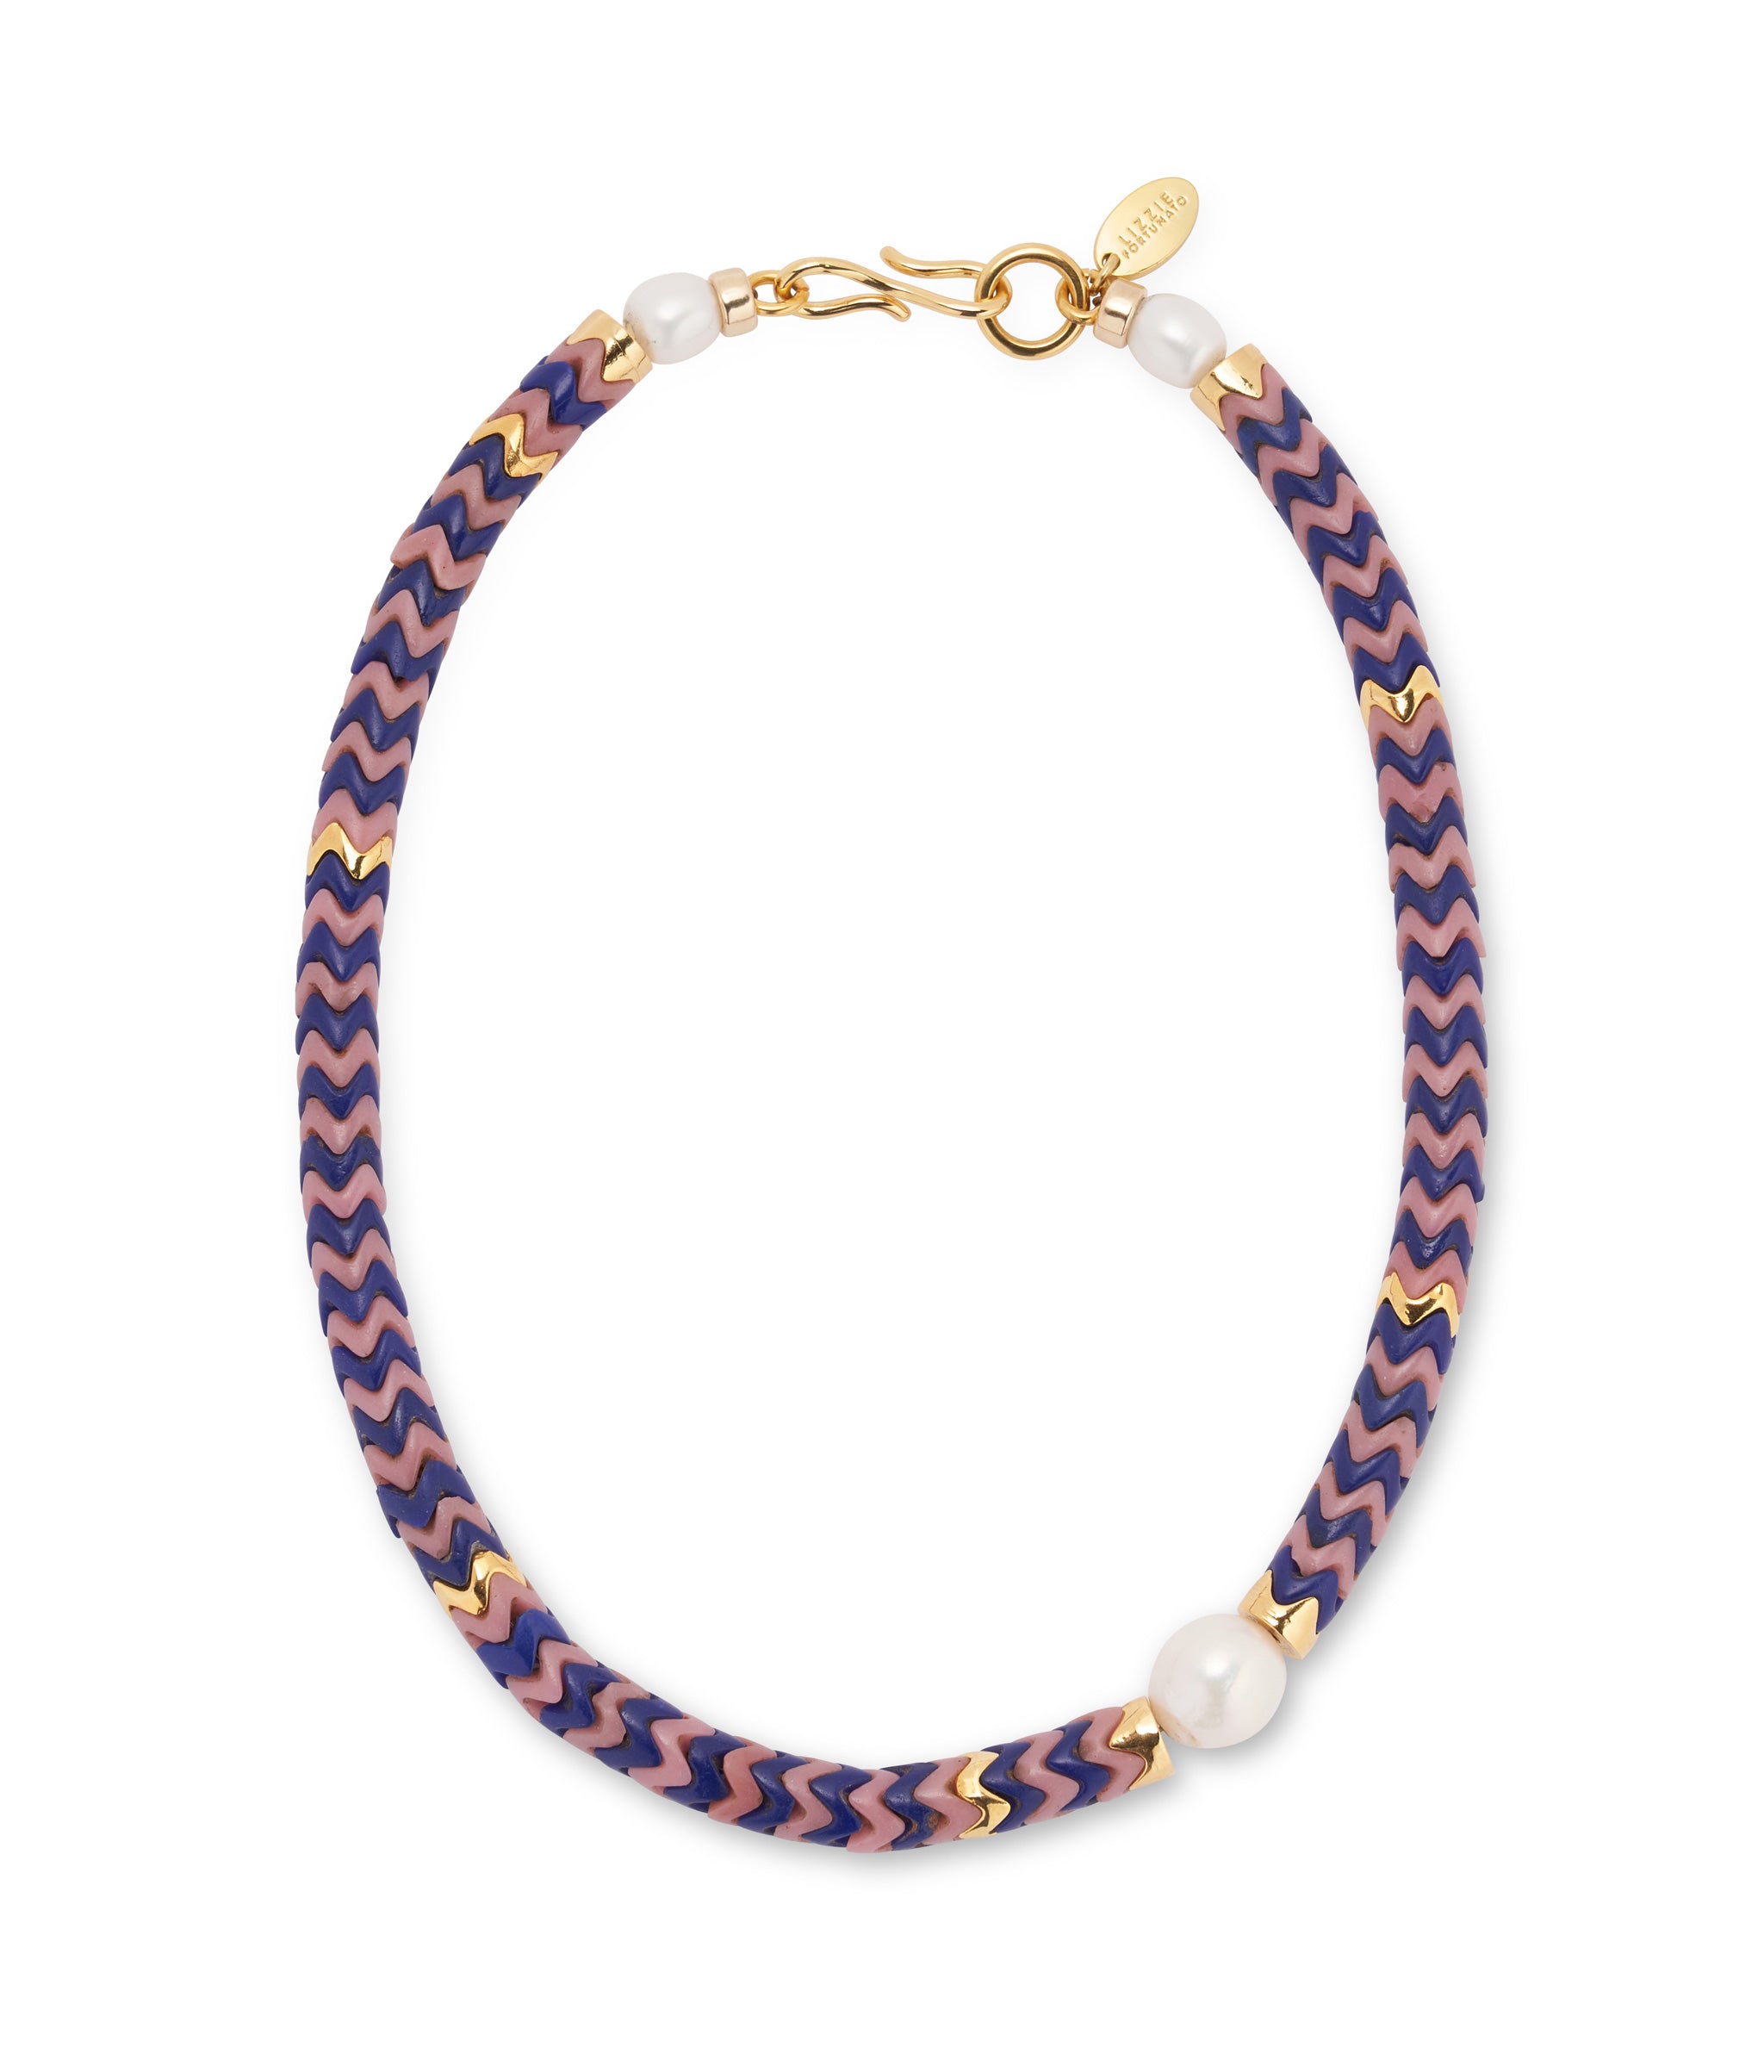 Painted Coast Necklace in Dusk. Single strand of interlocking wavy glass beads in navy and pink with pearl accents.